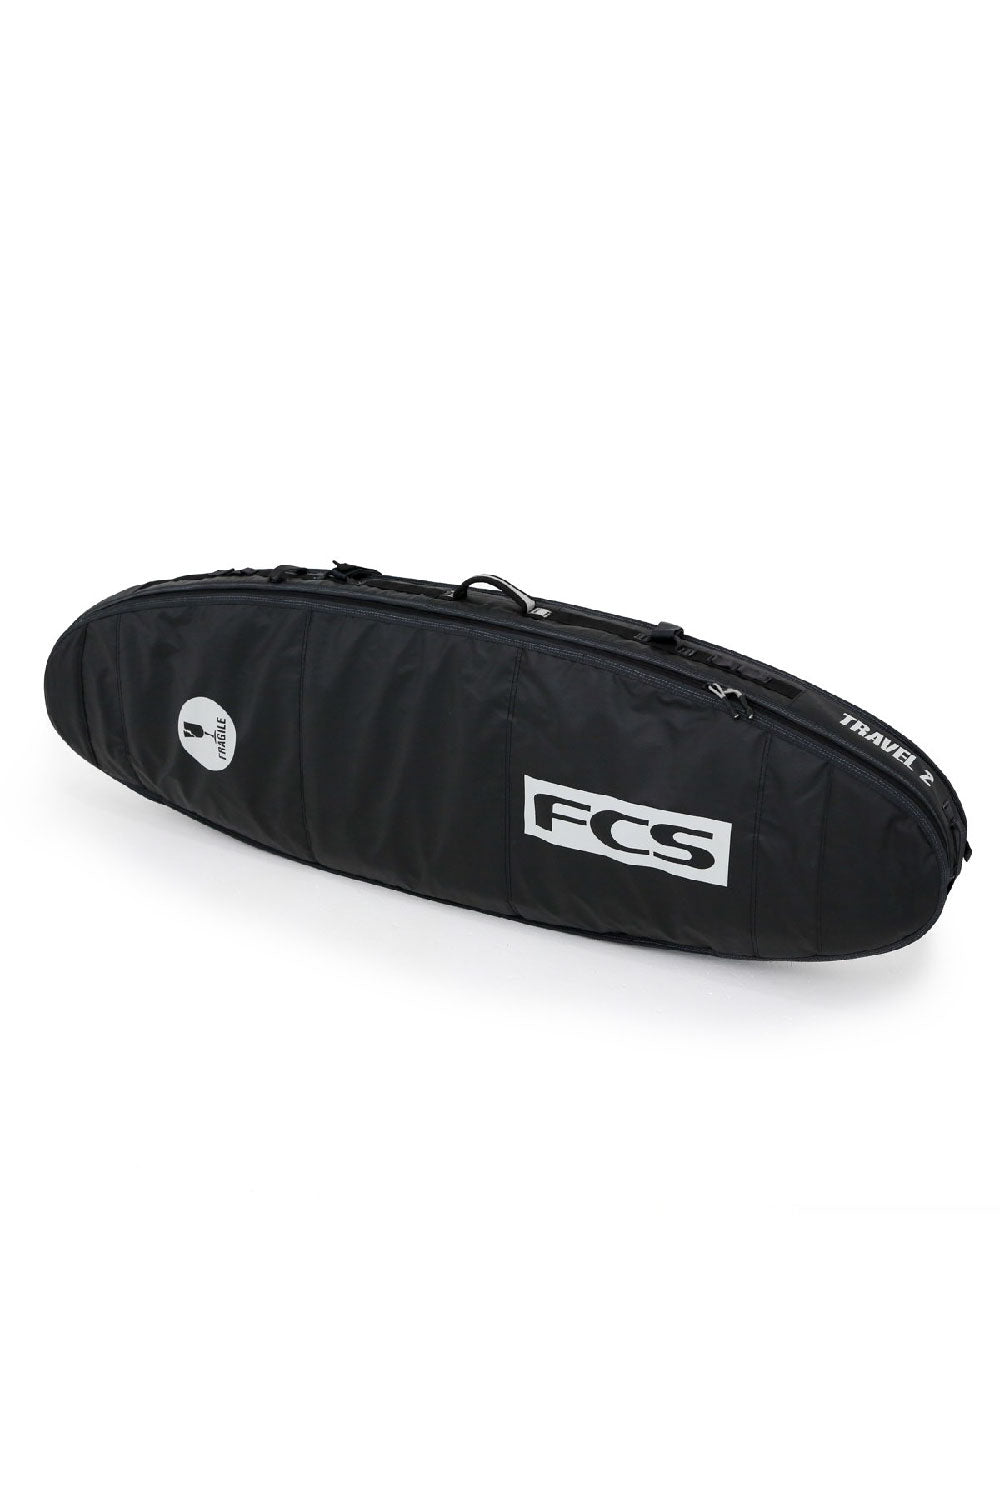 FCS Travel 2 Funboard Board Cover